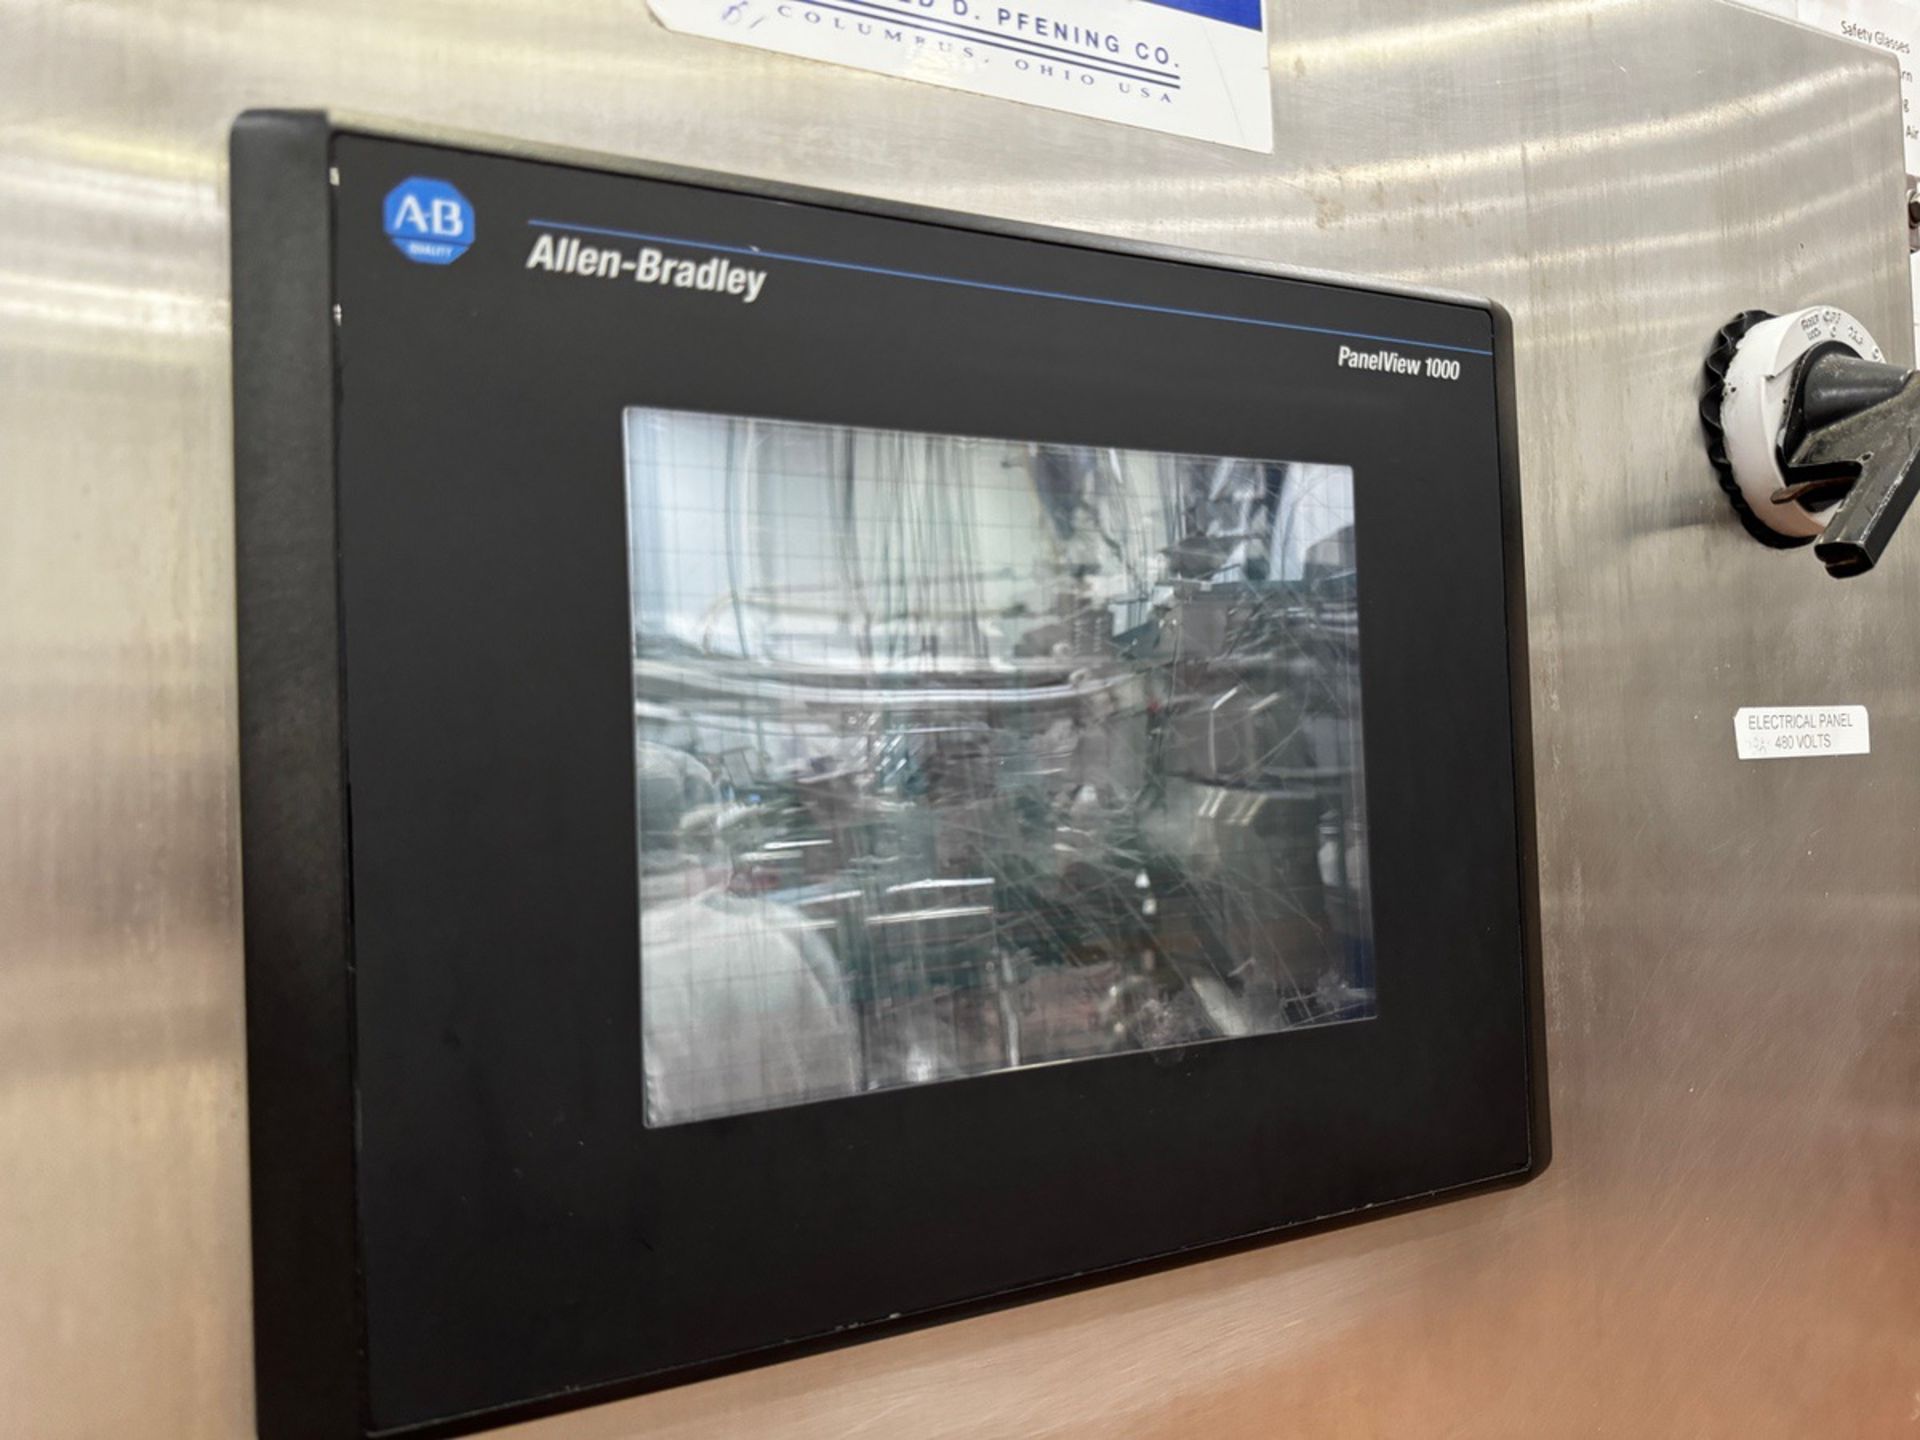 Pfenig Flour Delivery Control Panel with Allen-Bradley PanelView 1000 - Image 2 of 2